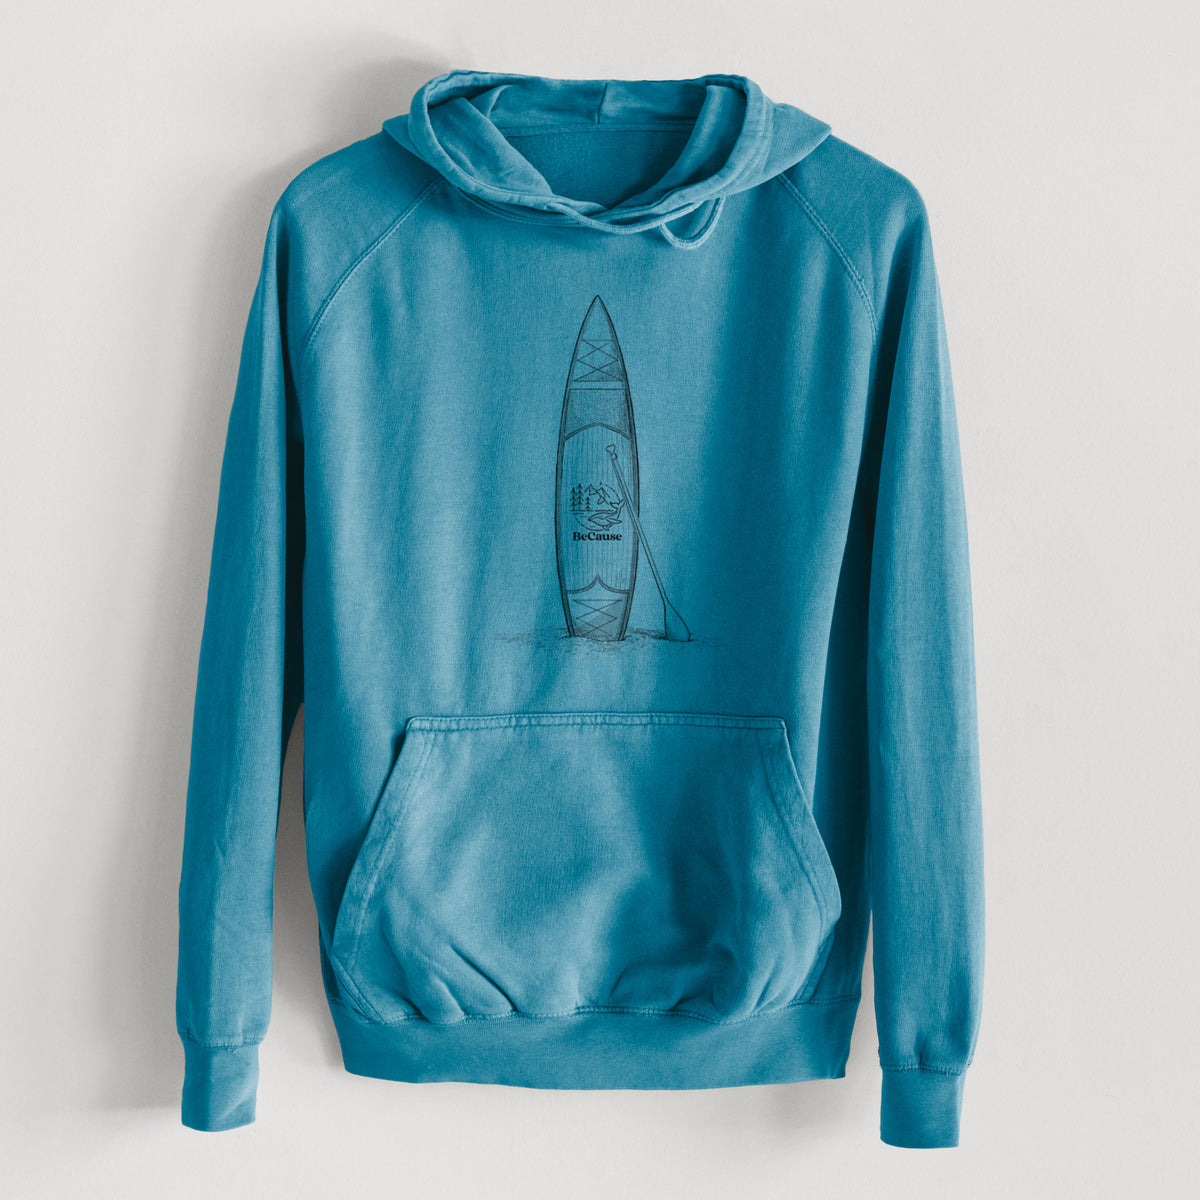 Stand-up Paddle Board  - Mid-Weight Unisex Vintage 100% Cotton Hoodie